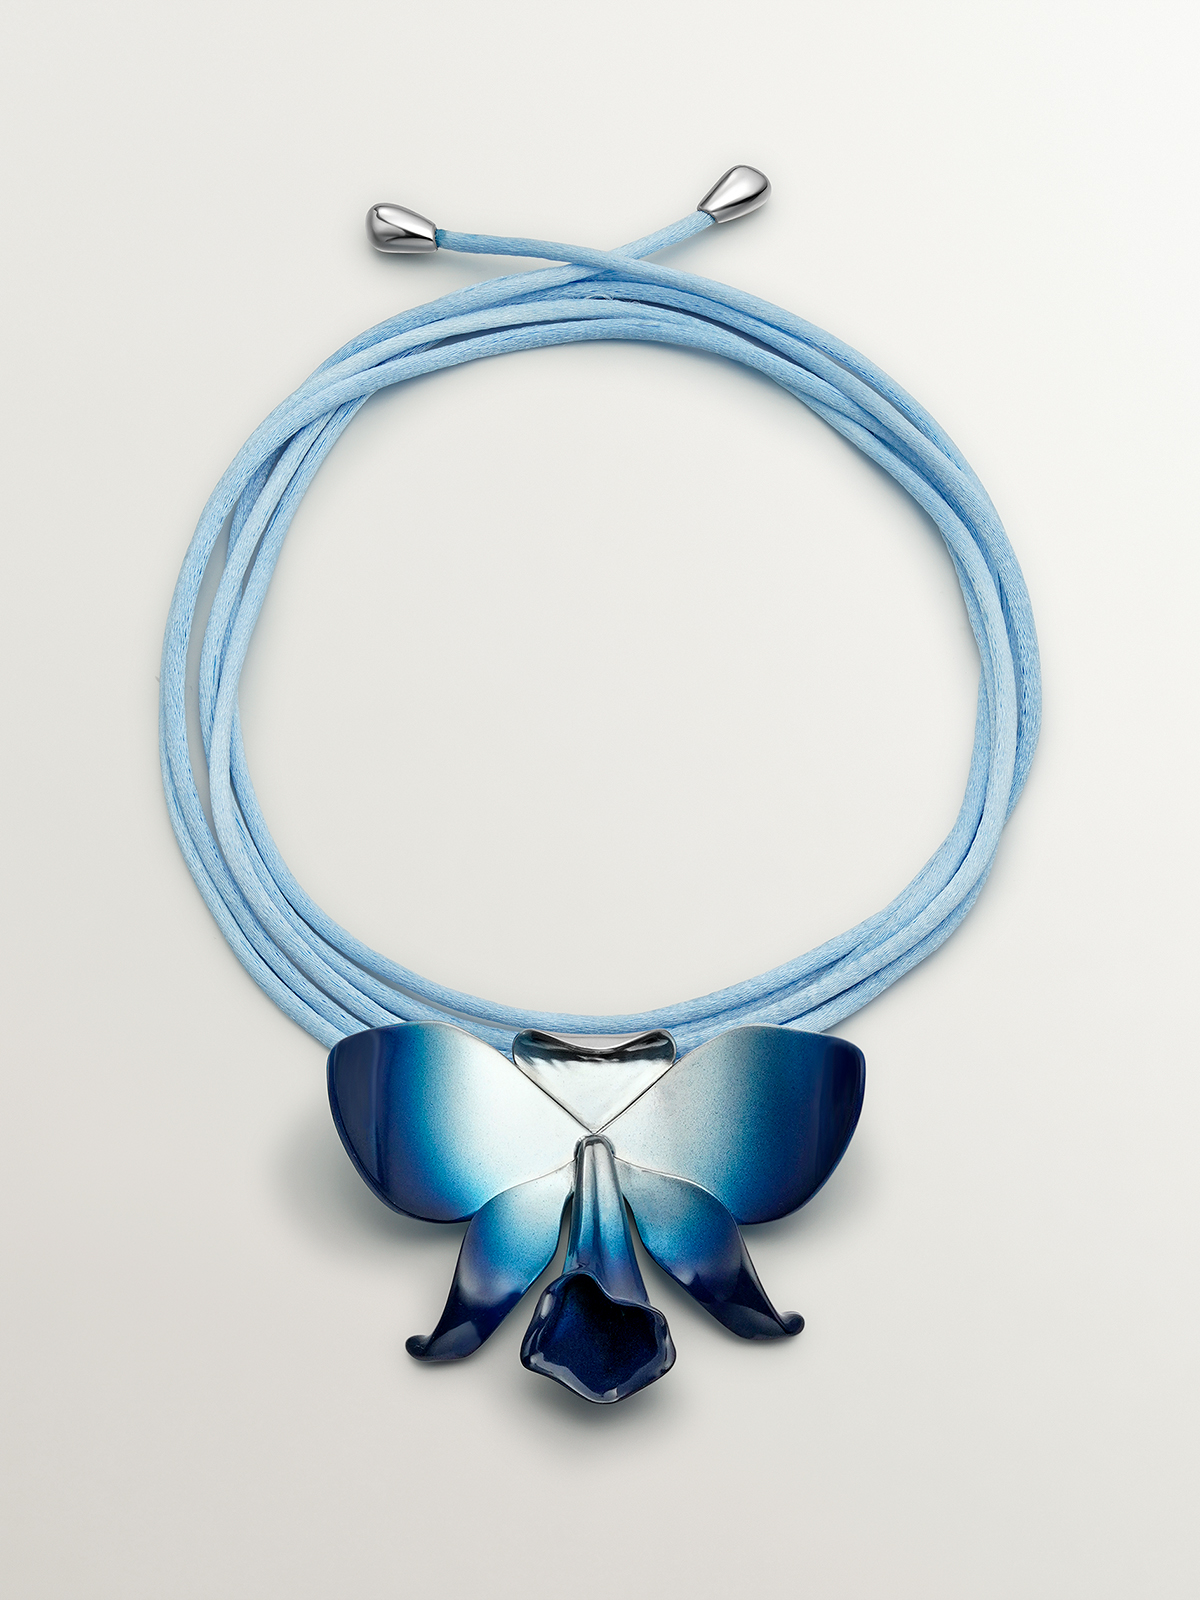 Cord and 925 silver necklace in the shape of an orchid, gradient blue enamel and polished effect